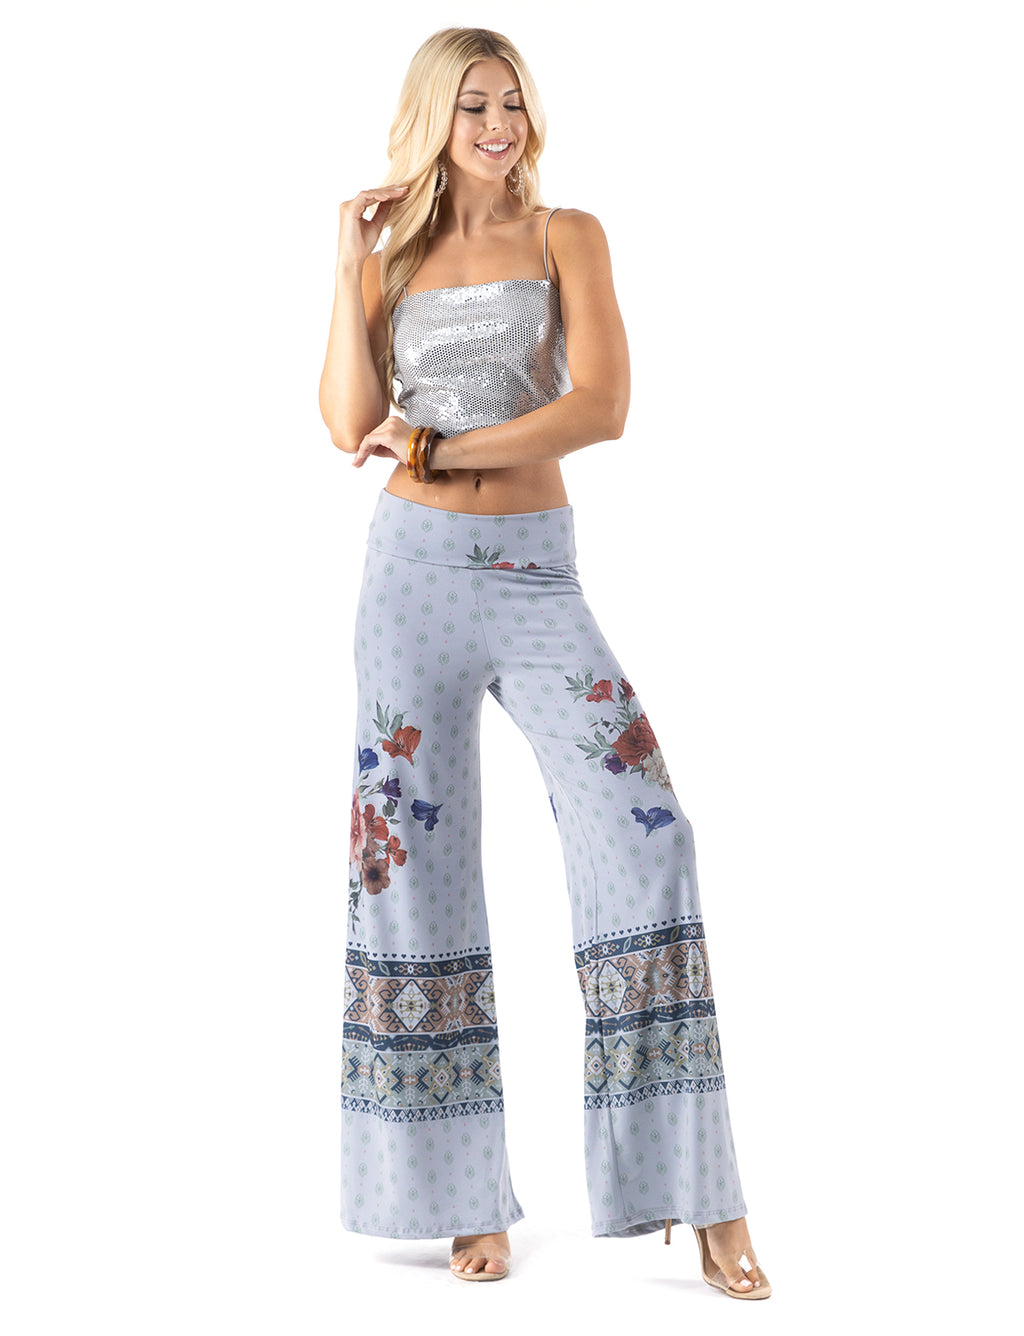 Beautiful woman wearing this amazing Blue Red Floral High waist palazzo pants featuring pockets, wide legs, and a comfortable stretchy fabric Perfect for any activity,relaxing day,beautiful and unique,comfortable and flattering